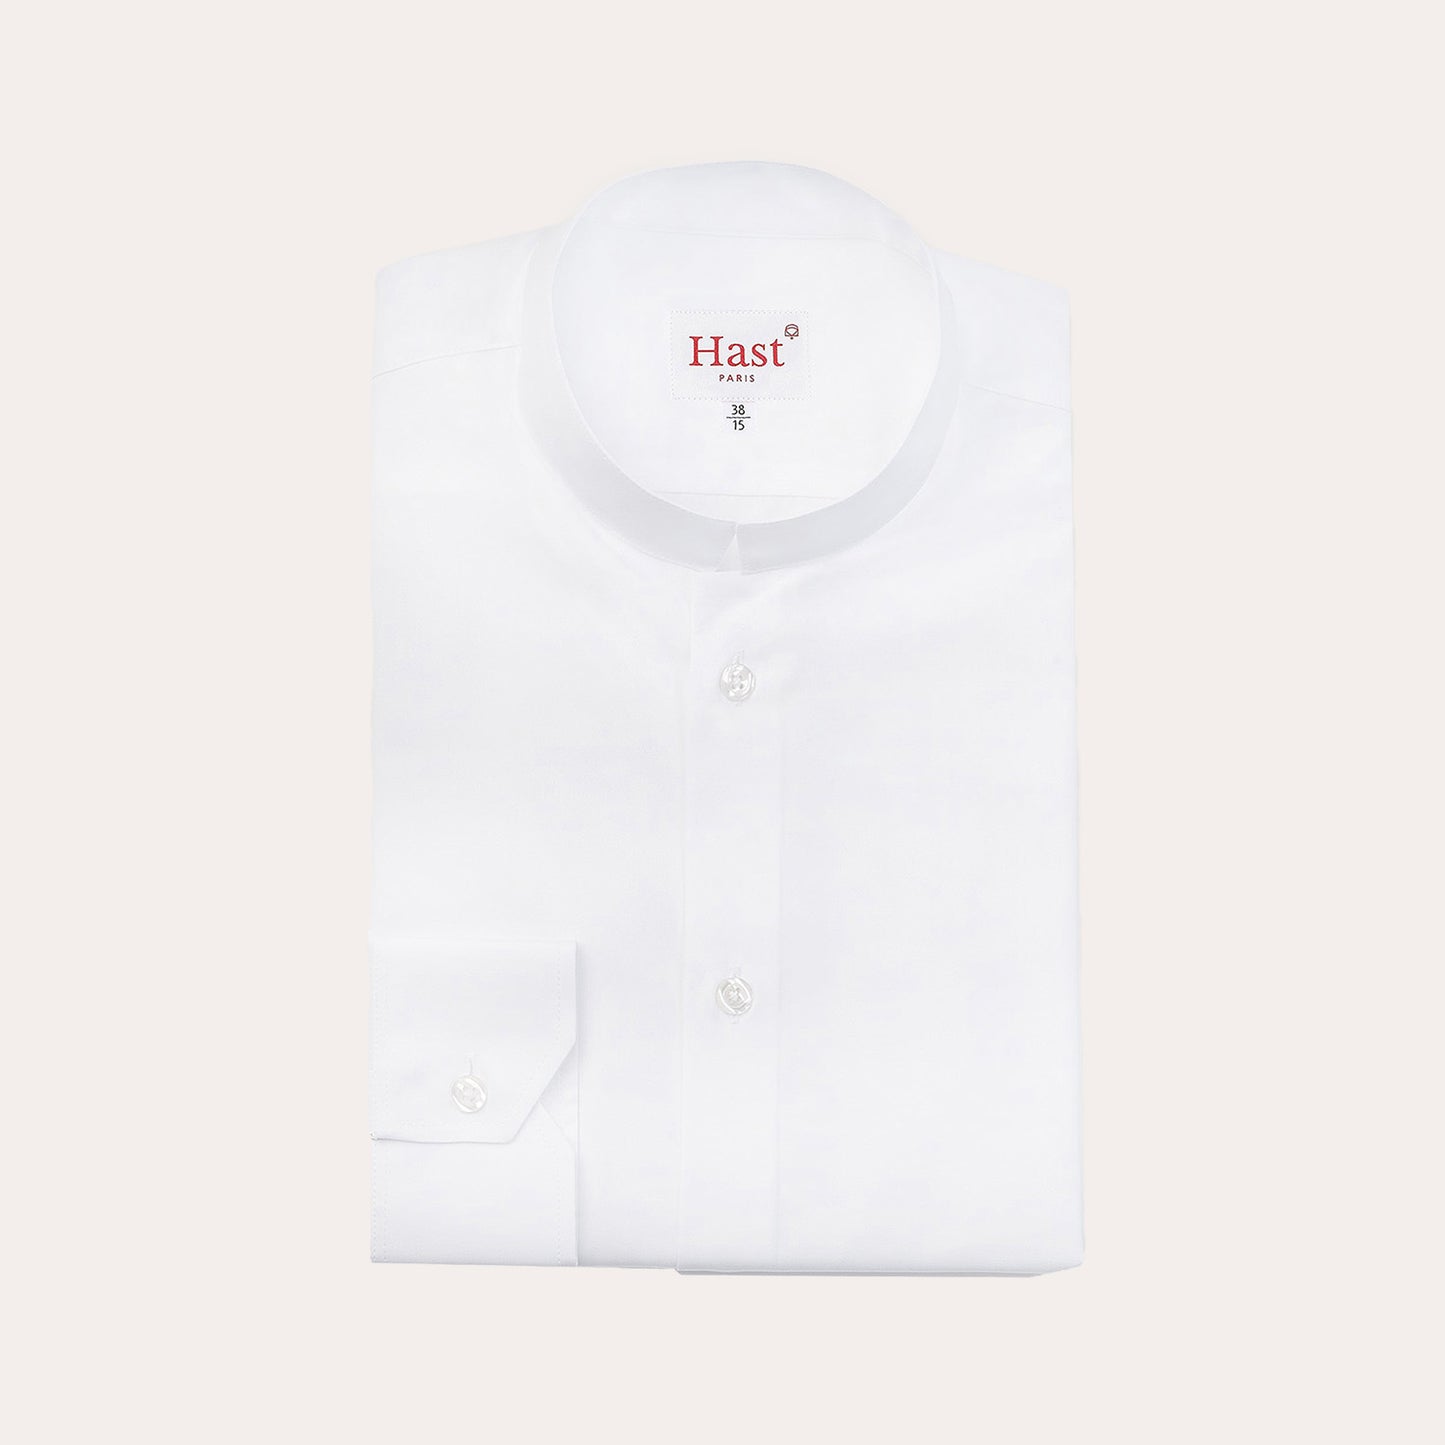 Fitted shirt in white double-twisted poplin